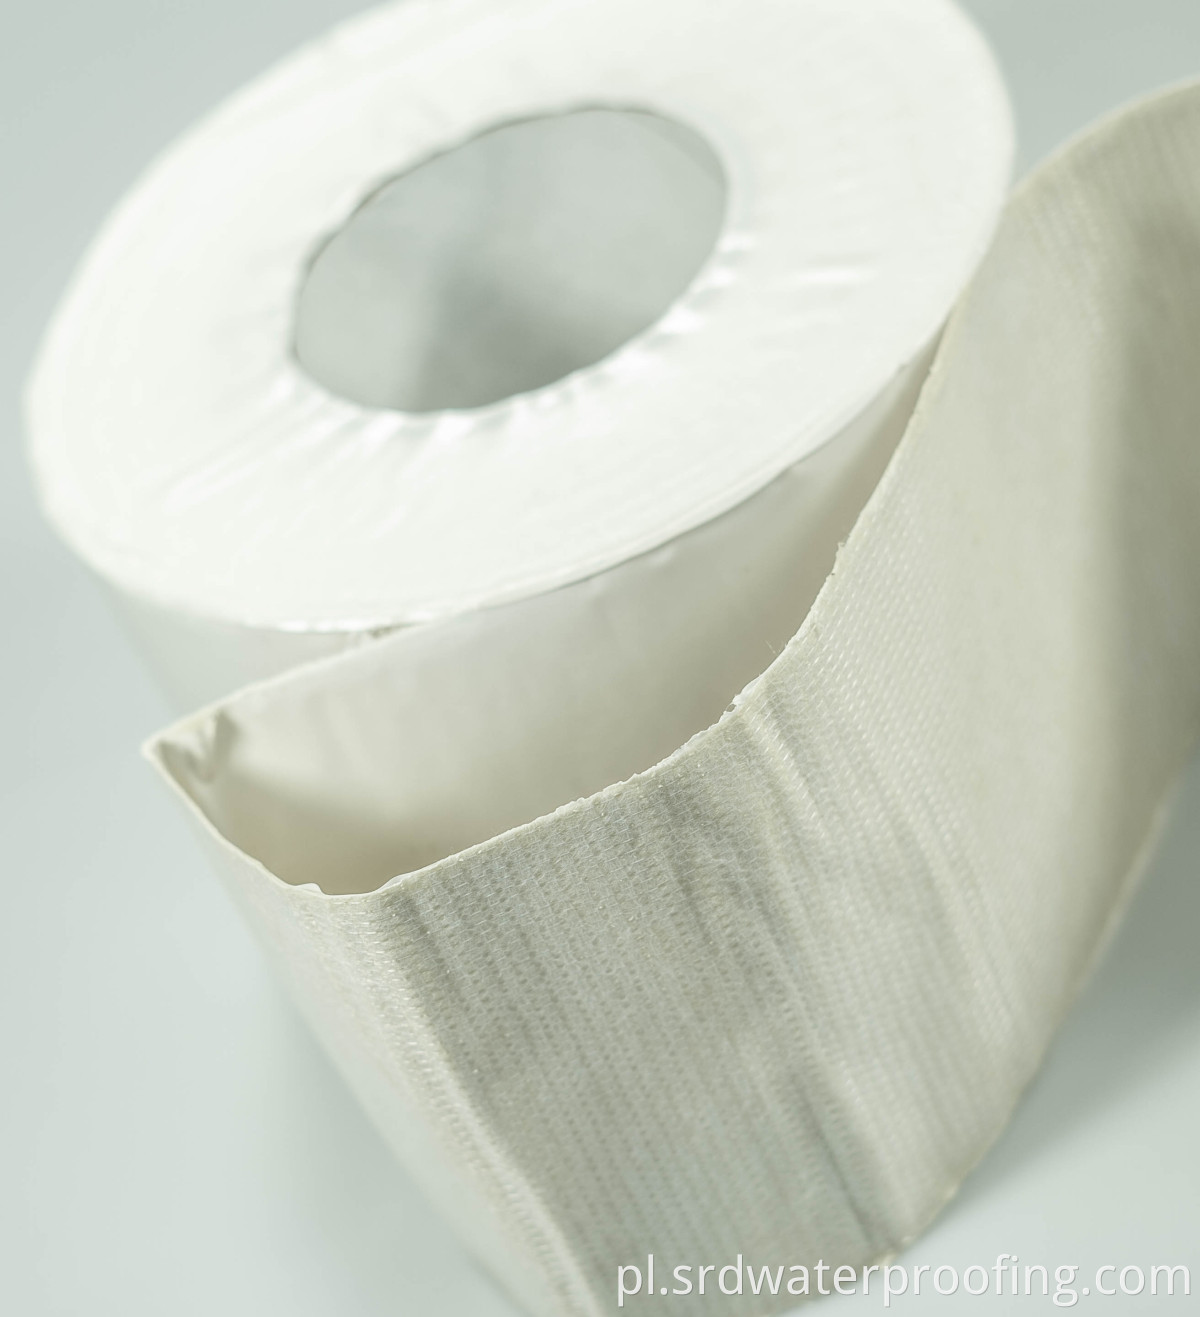 FLEXPRUFE SYSTEM Non-Woven tape